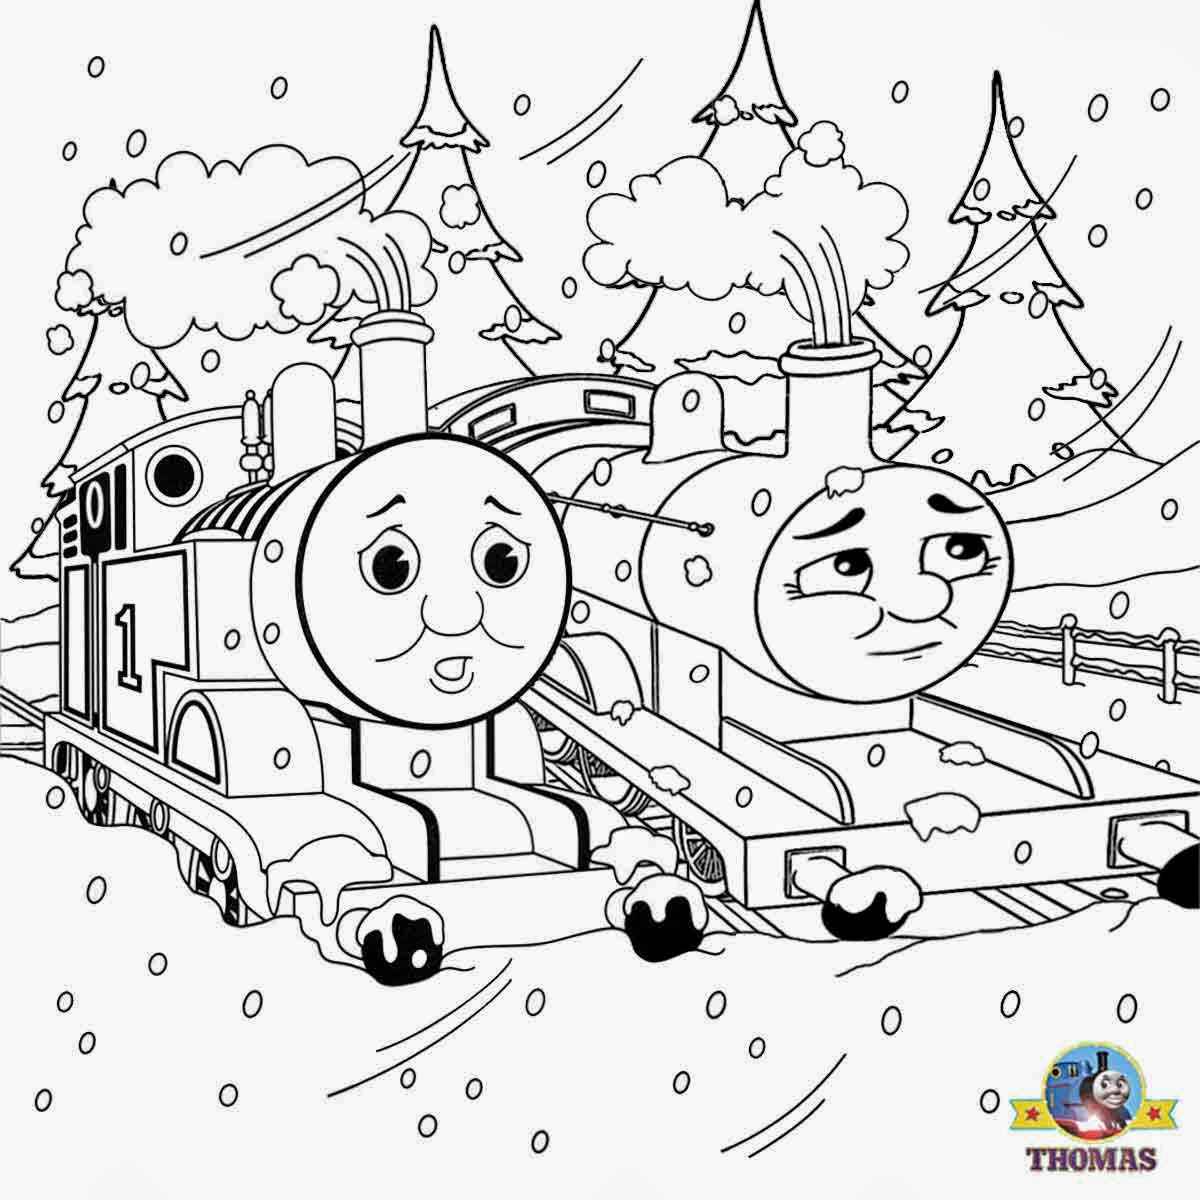 Thomas The Train Coloring Pages Printable For Free - Coloring ...